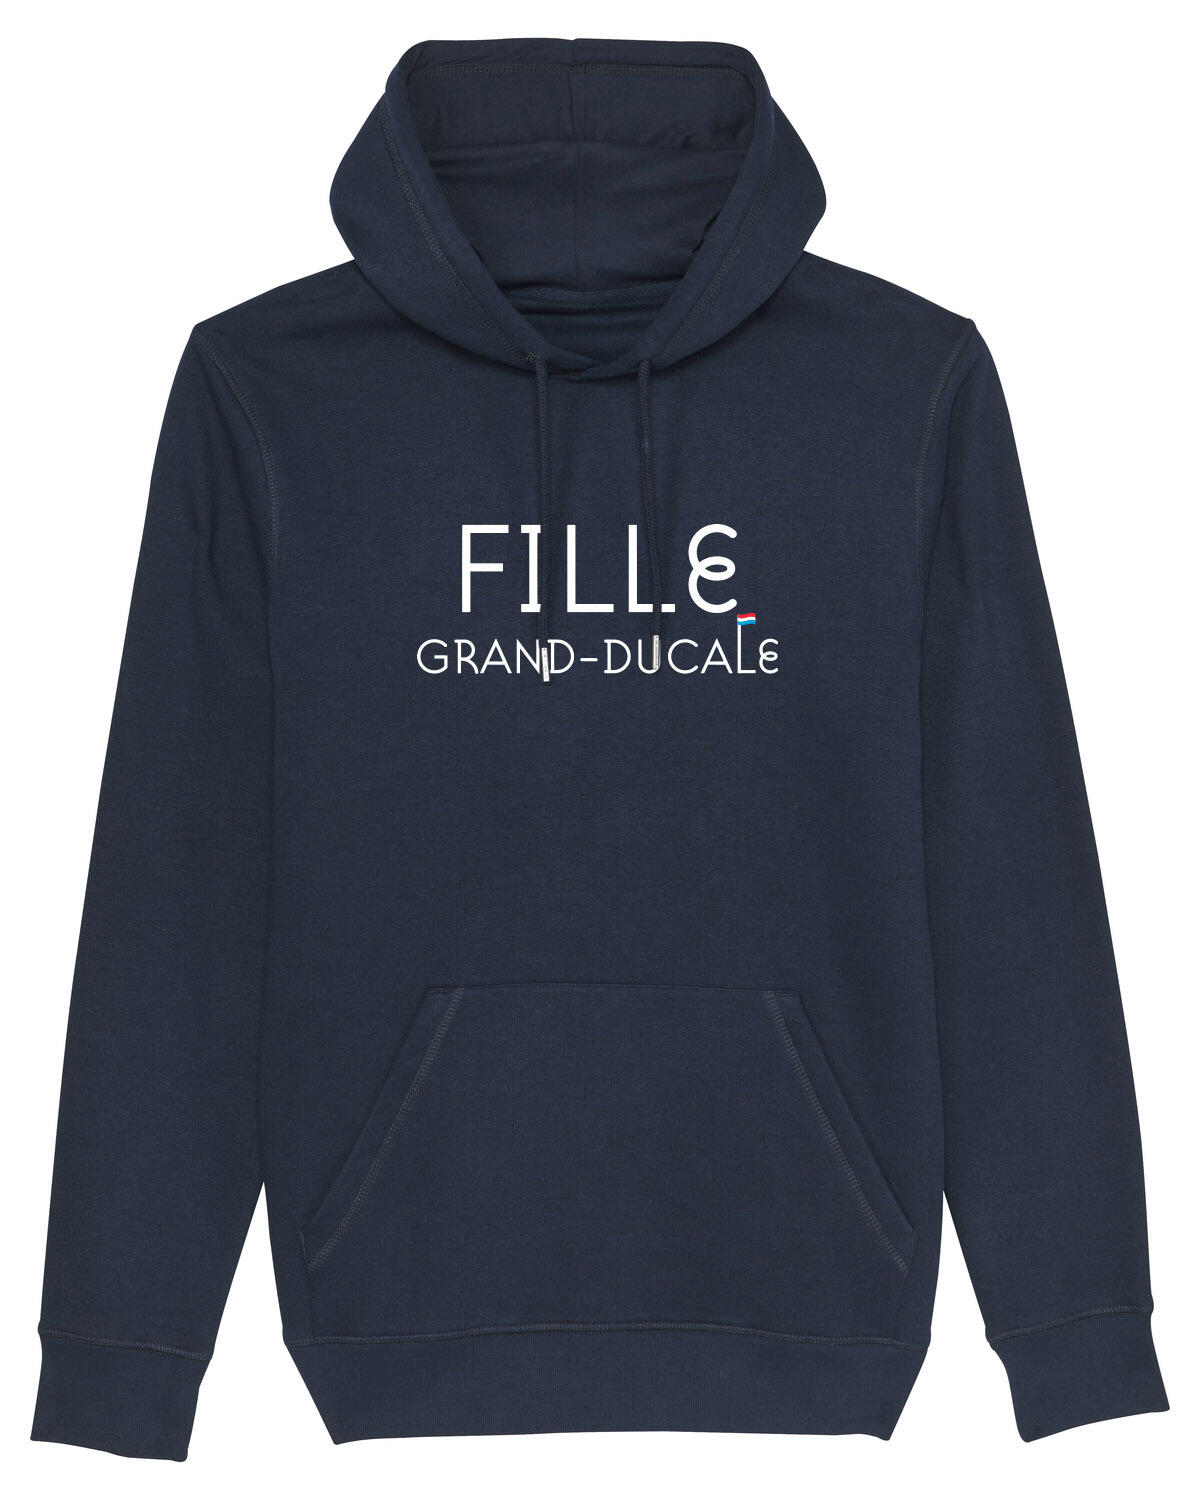 LE HOODIE FILLE GRAND-DUCALE